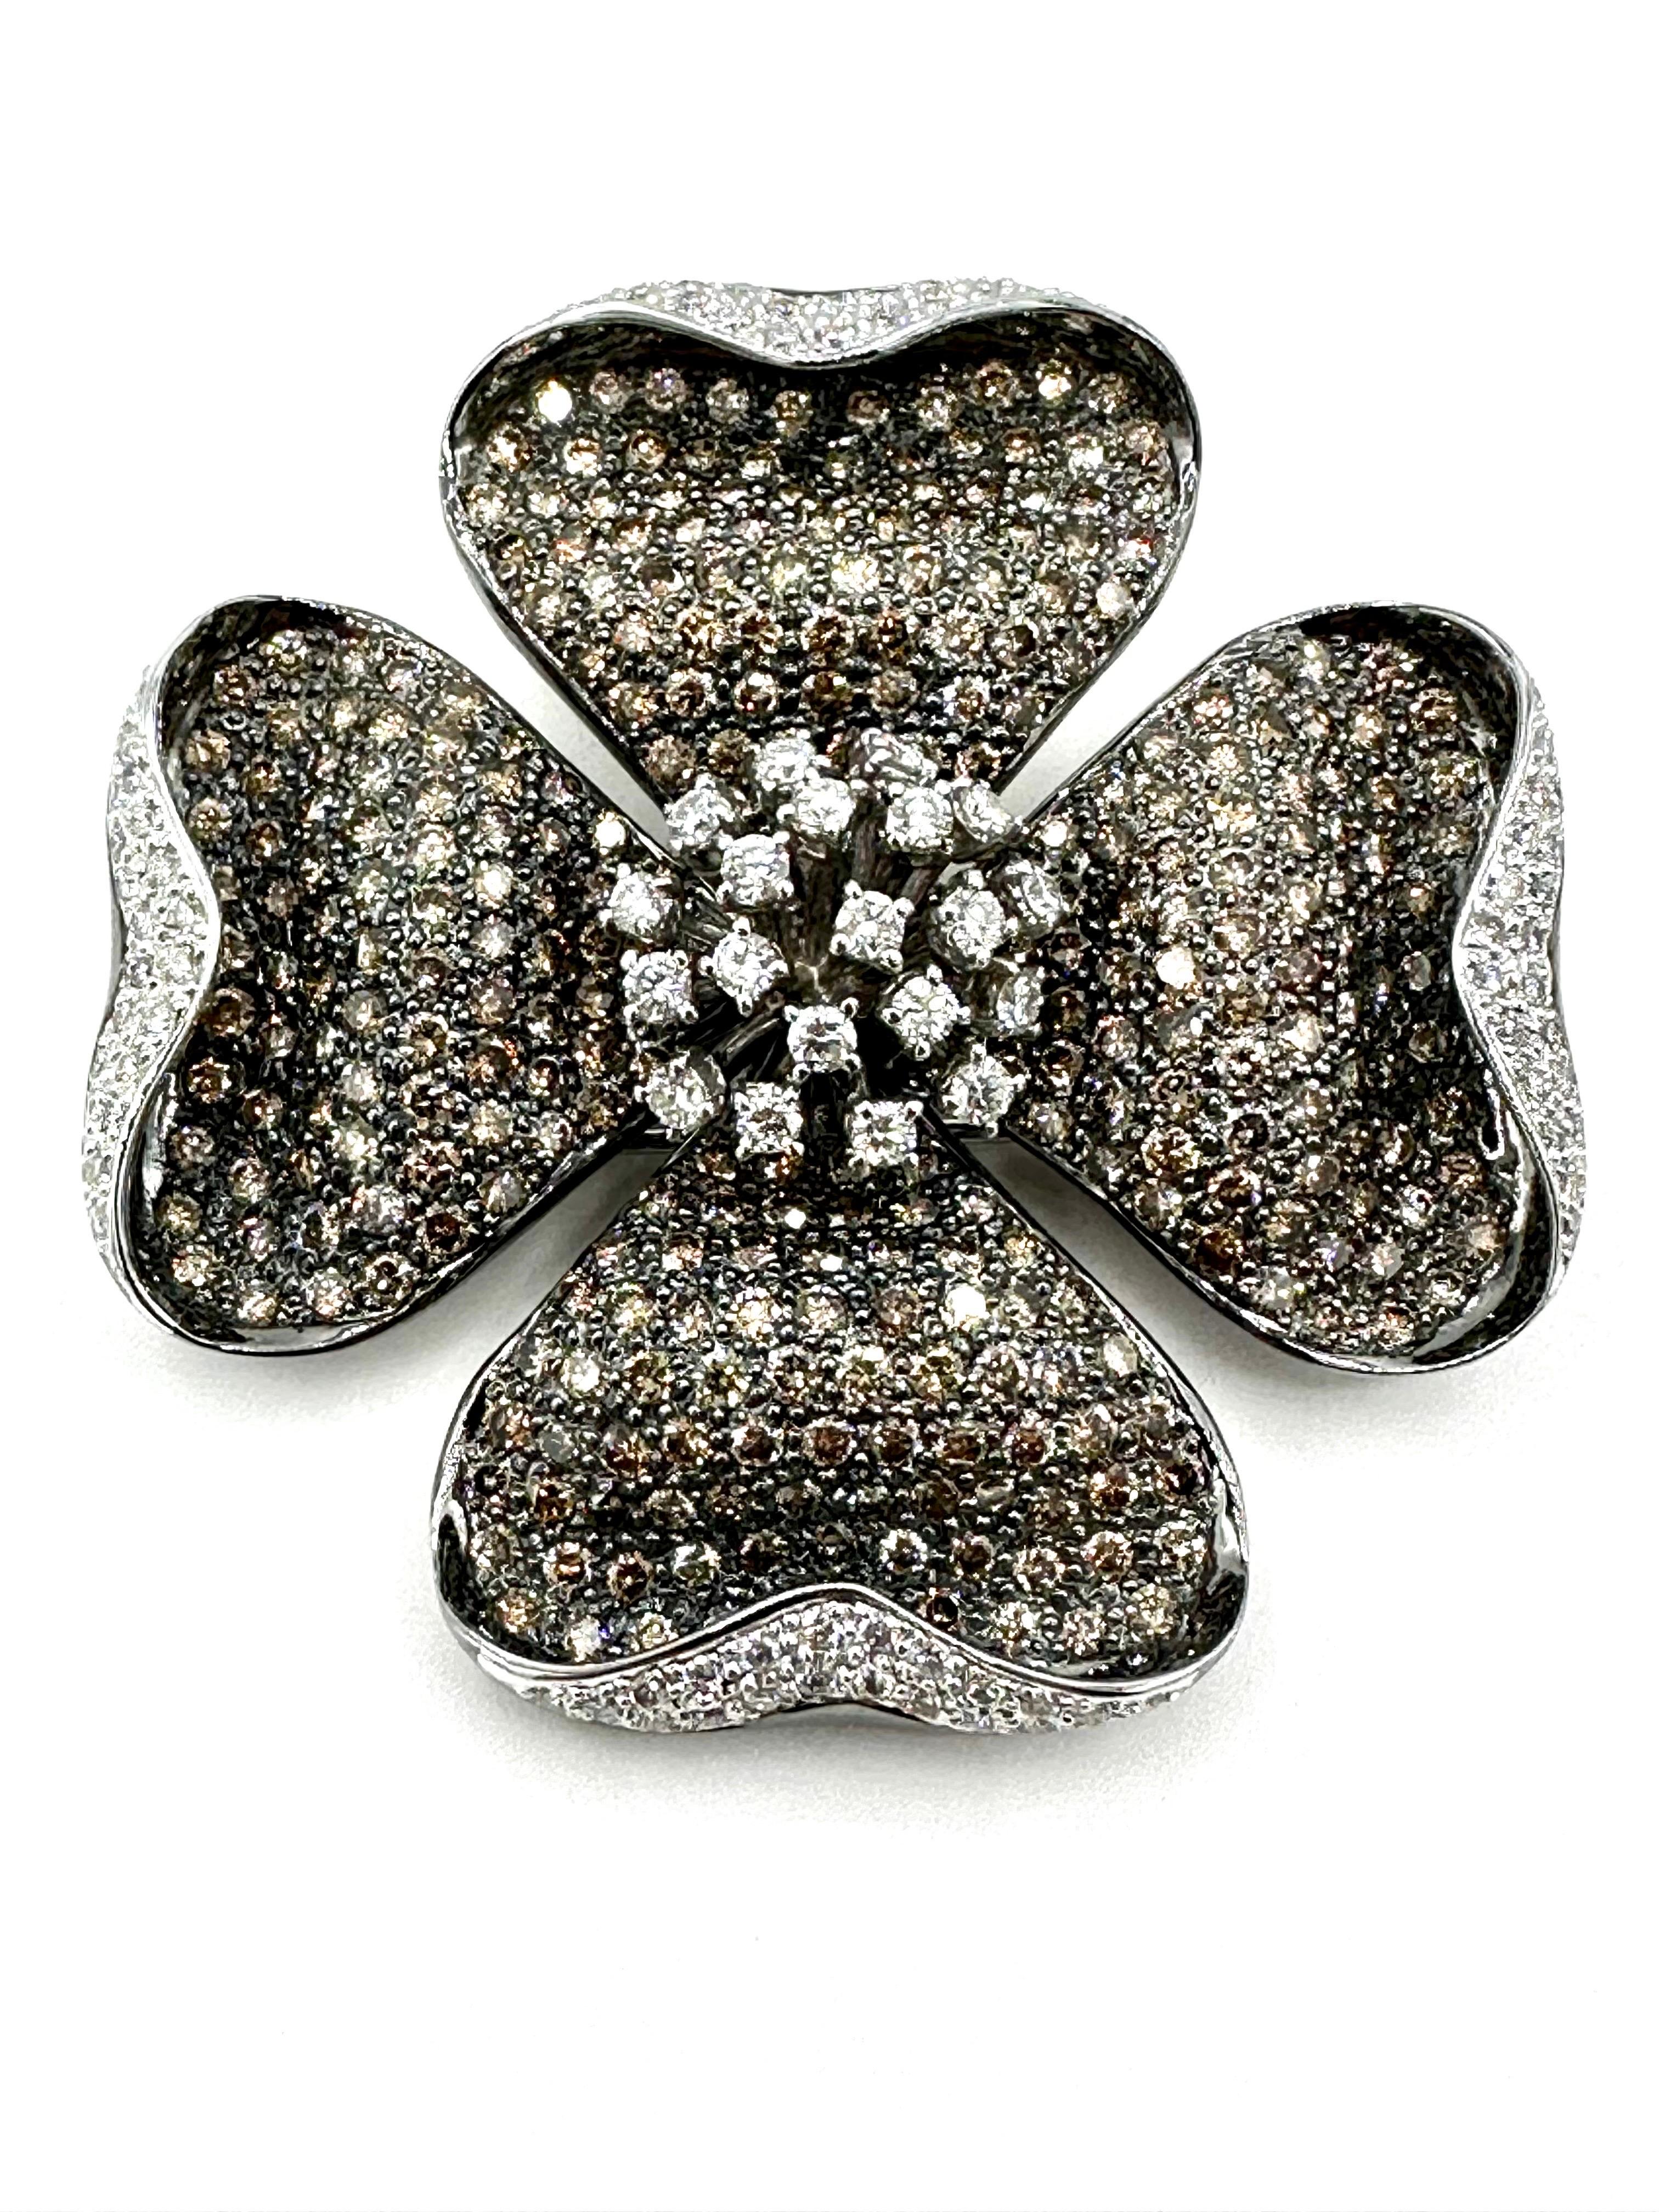 This dogwood brooch is glistening with 343 round brilliant cognac and white Diamonds!  The Diamonds combine for a total weight of 10.72 carats set in 18K white gold.  The brooch features a double pin back with closure, and the back center of the